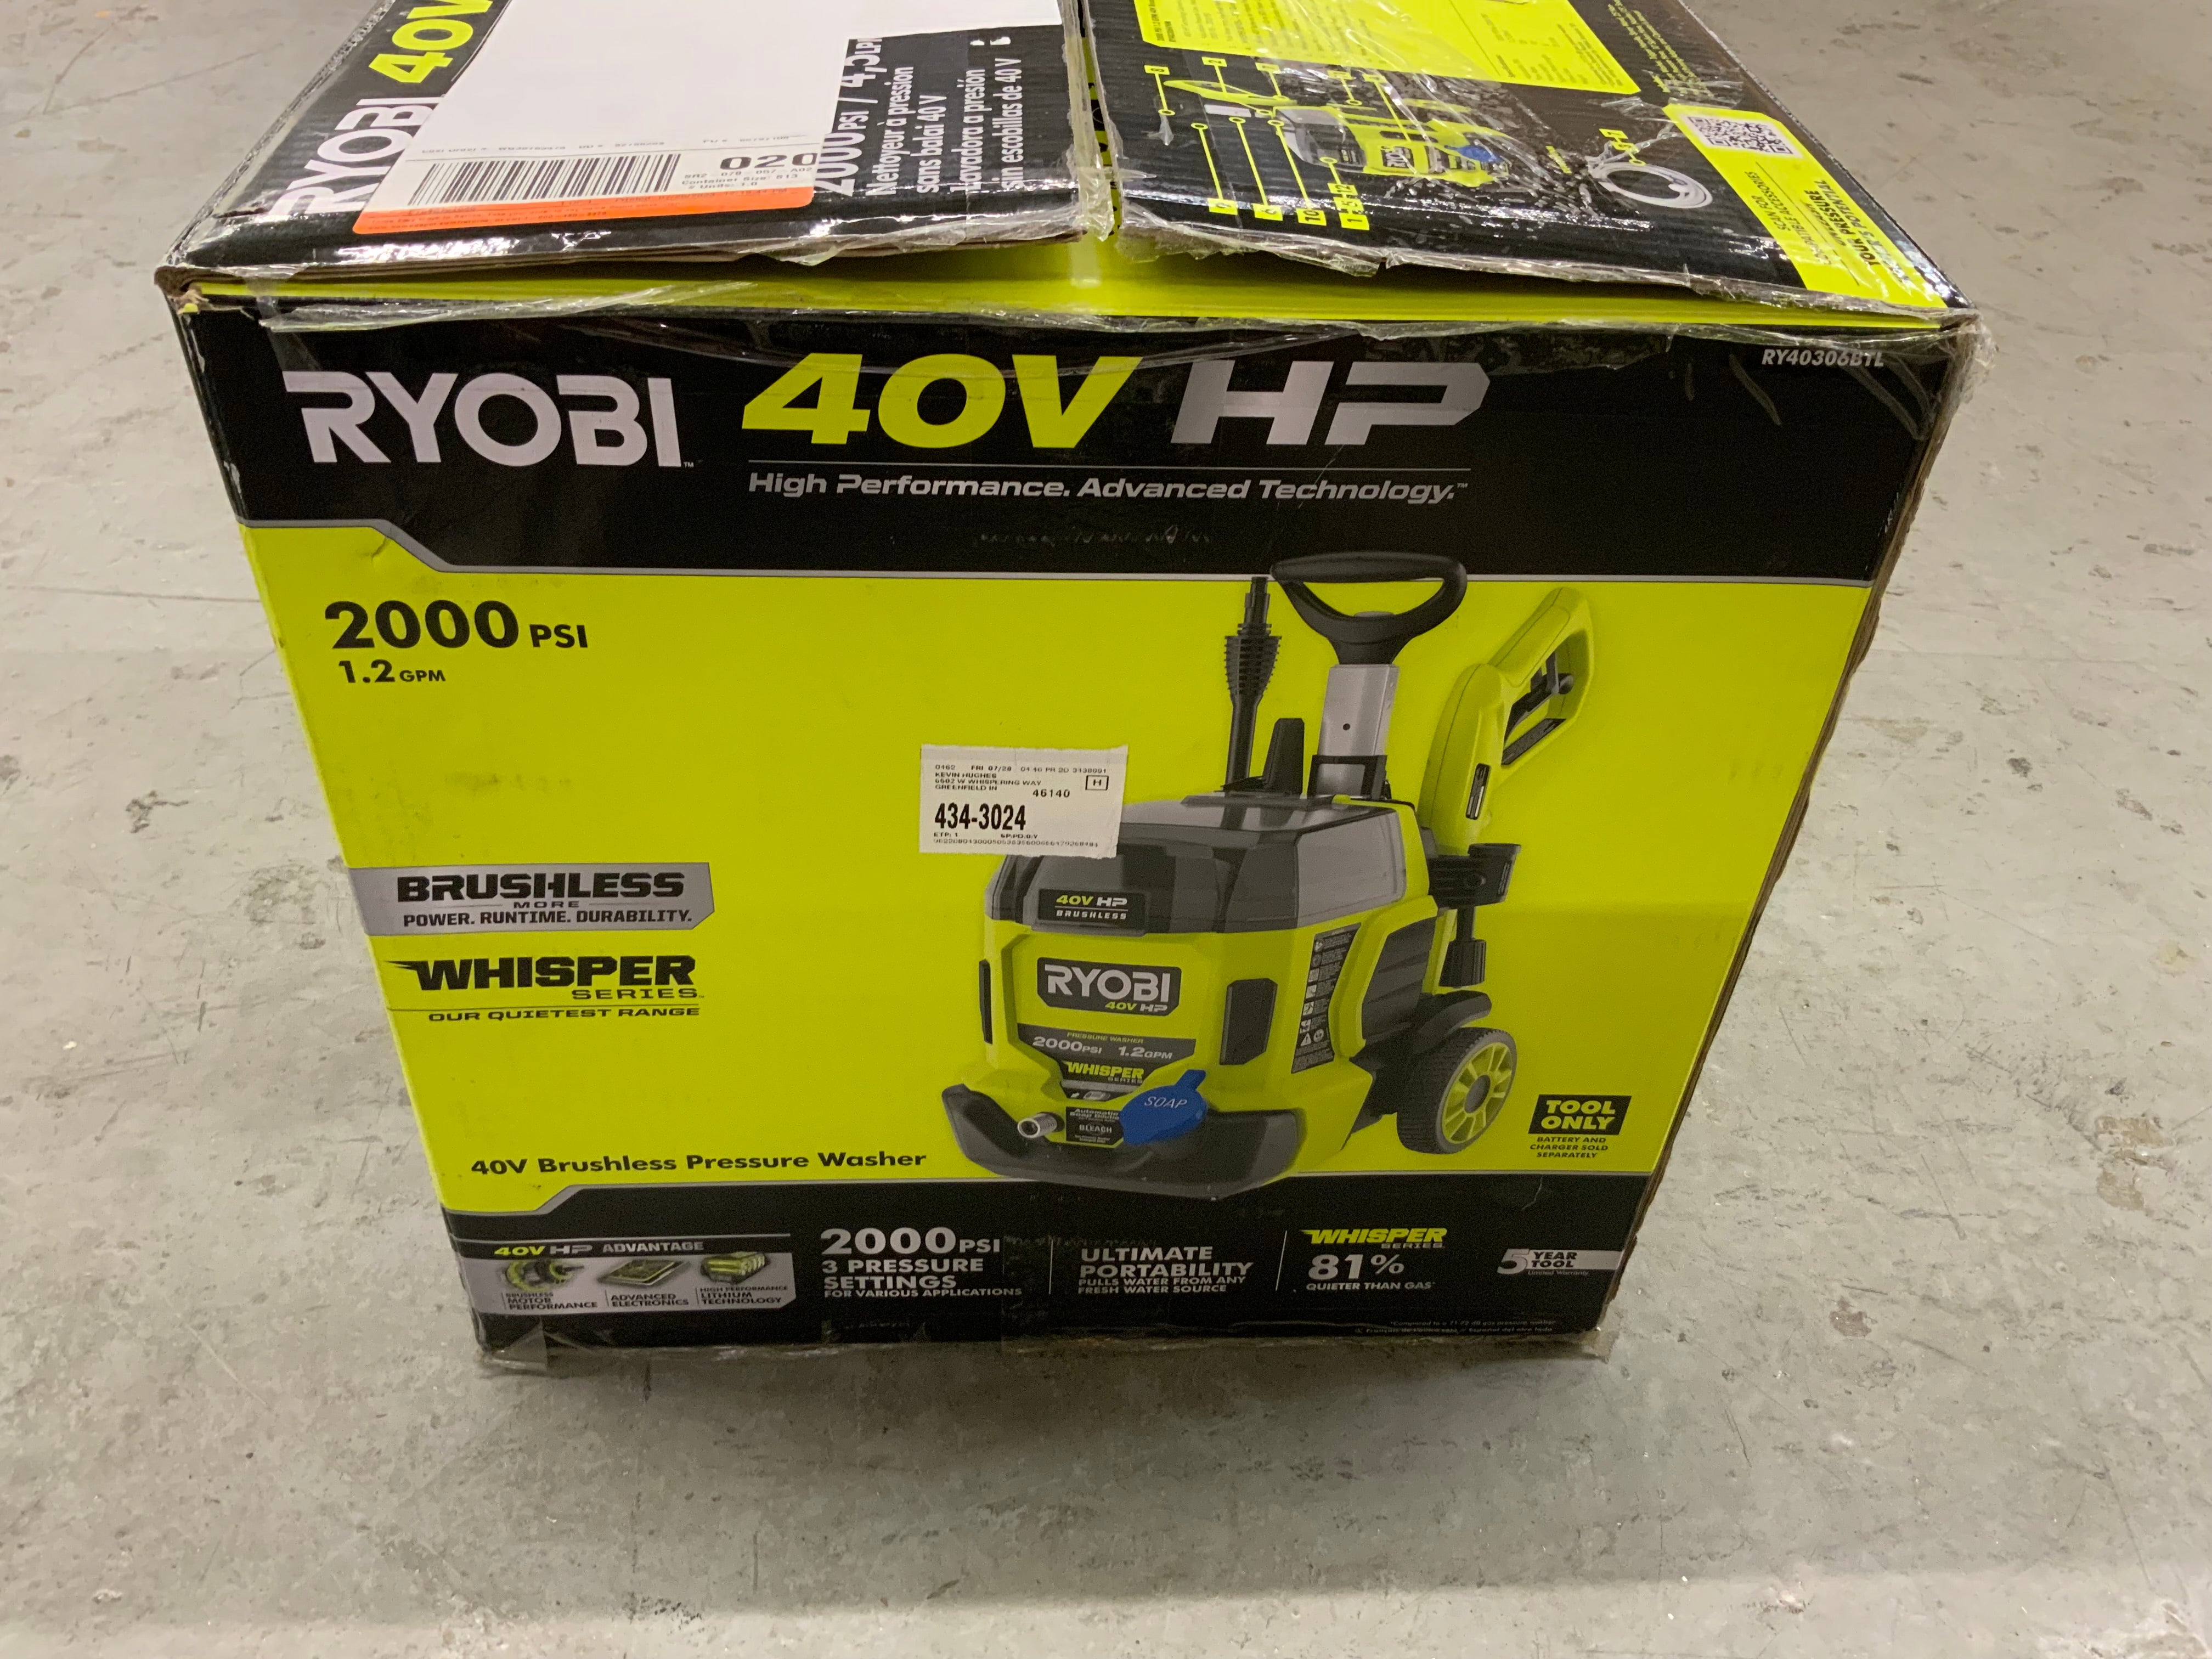 RYOBI 40V HP 2000 PSI 1.2 GPM Cold Water Pressure Washer **TOOL ONLY** (8135332495598)